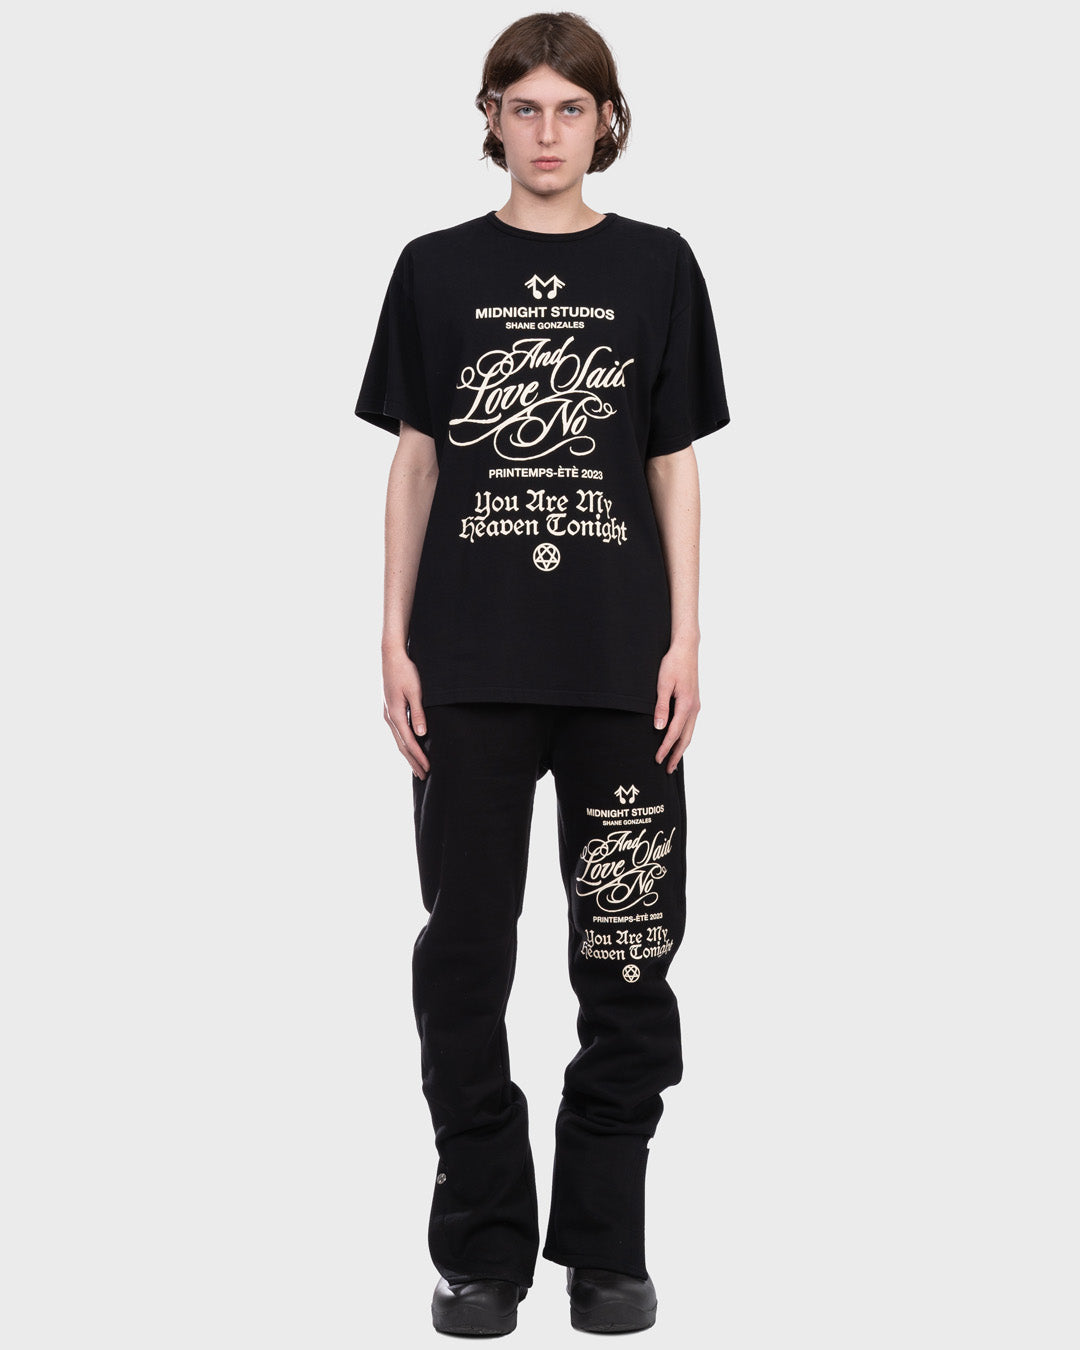 Heaven Tonight T-Shirt in Black. Front Angle.